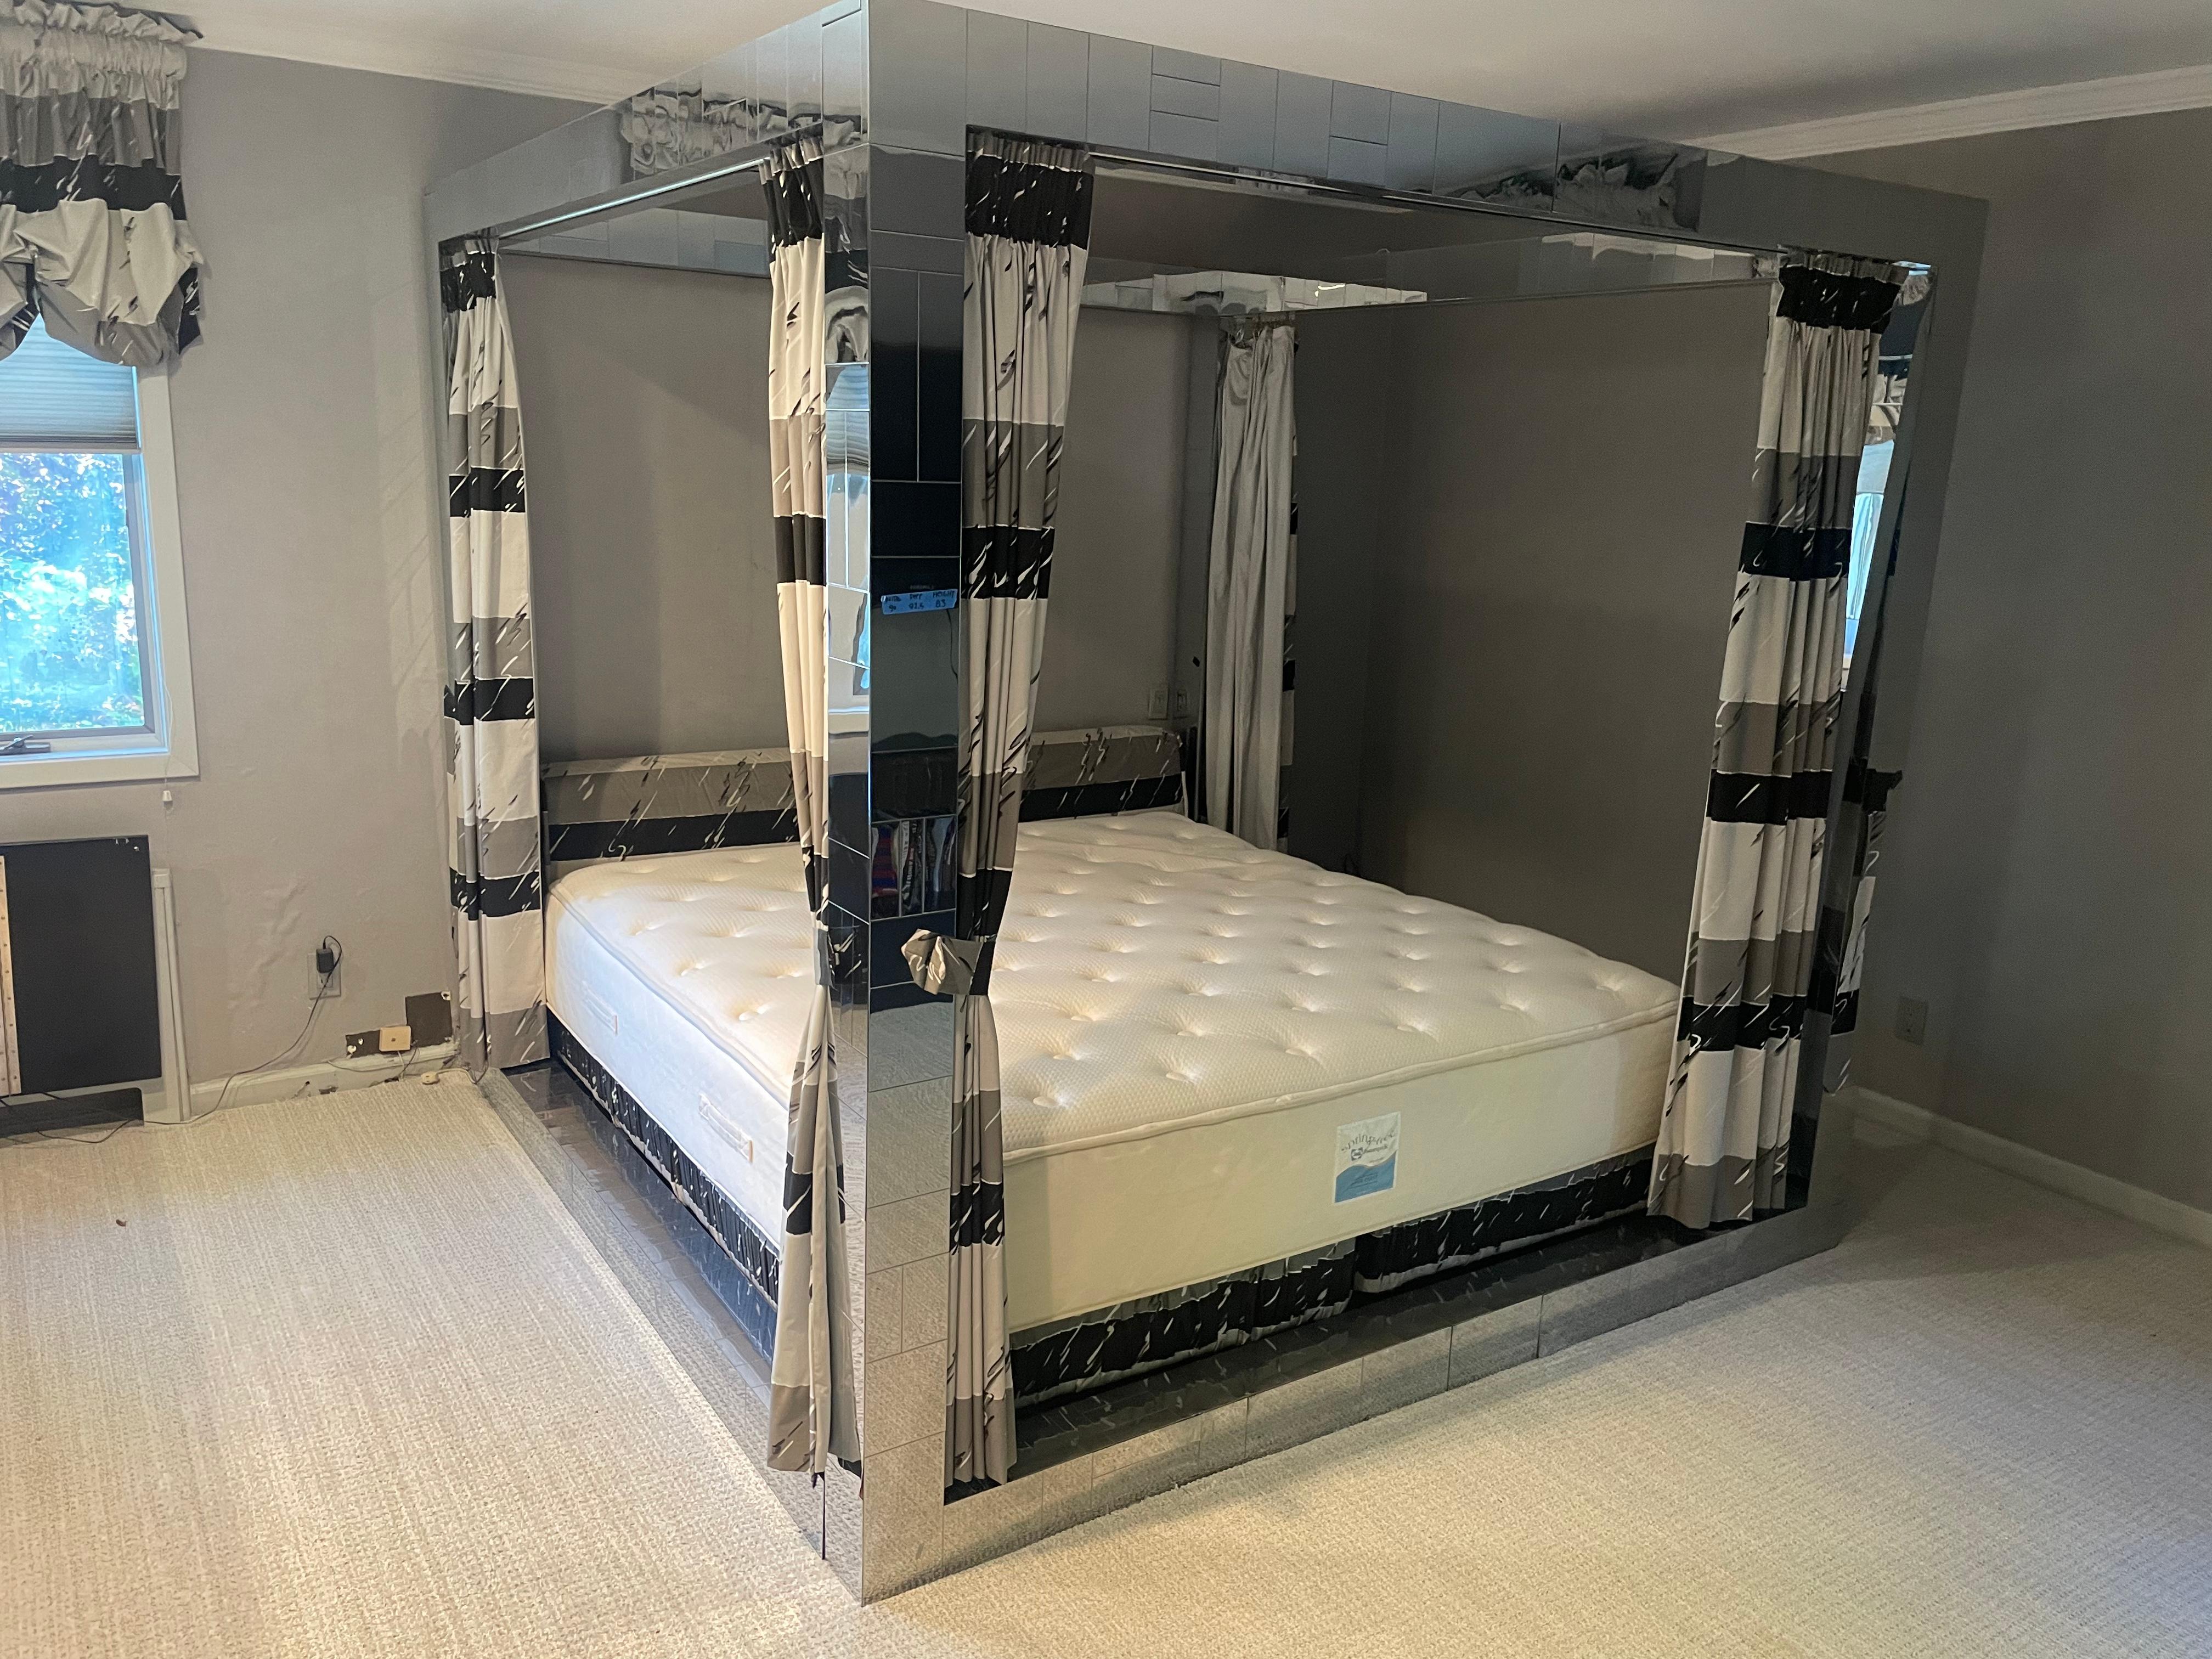 A Magnificent Paul Evans Cityscape four-poster canopy king-size bed in polished chrome patchwork.
interior measurements 82